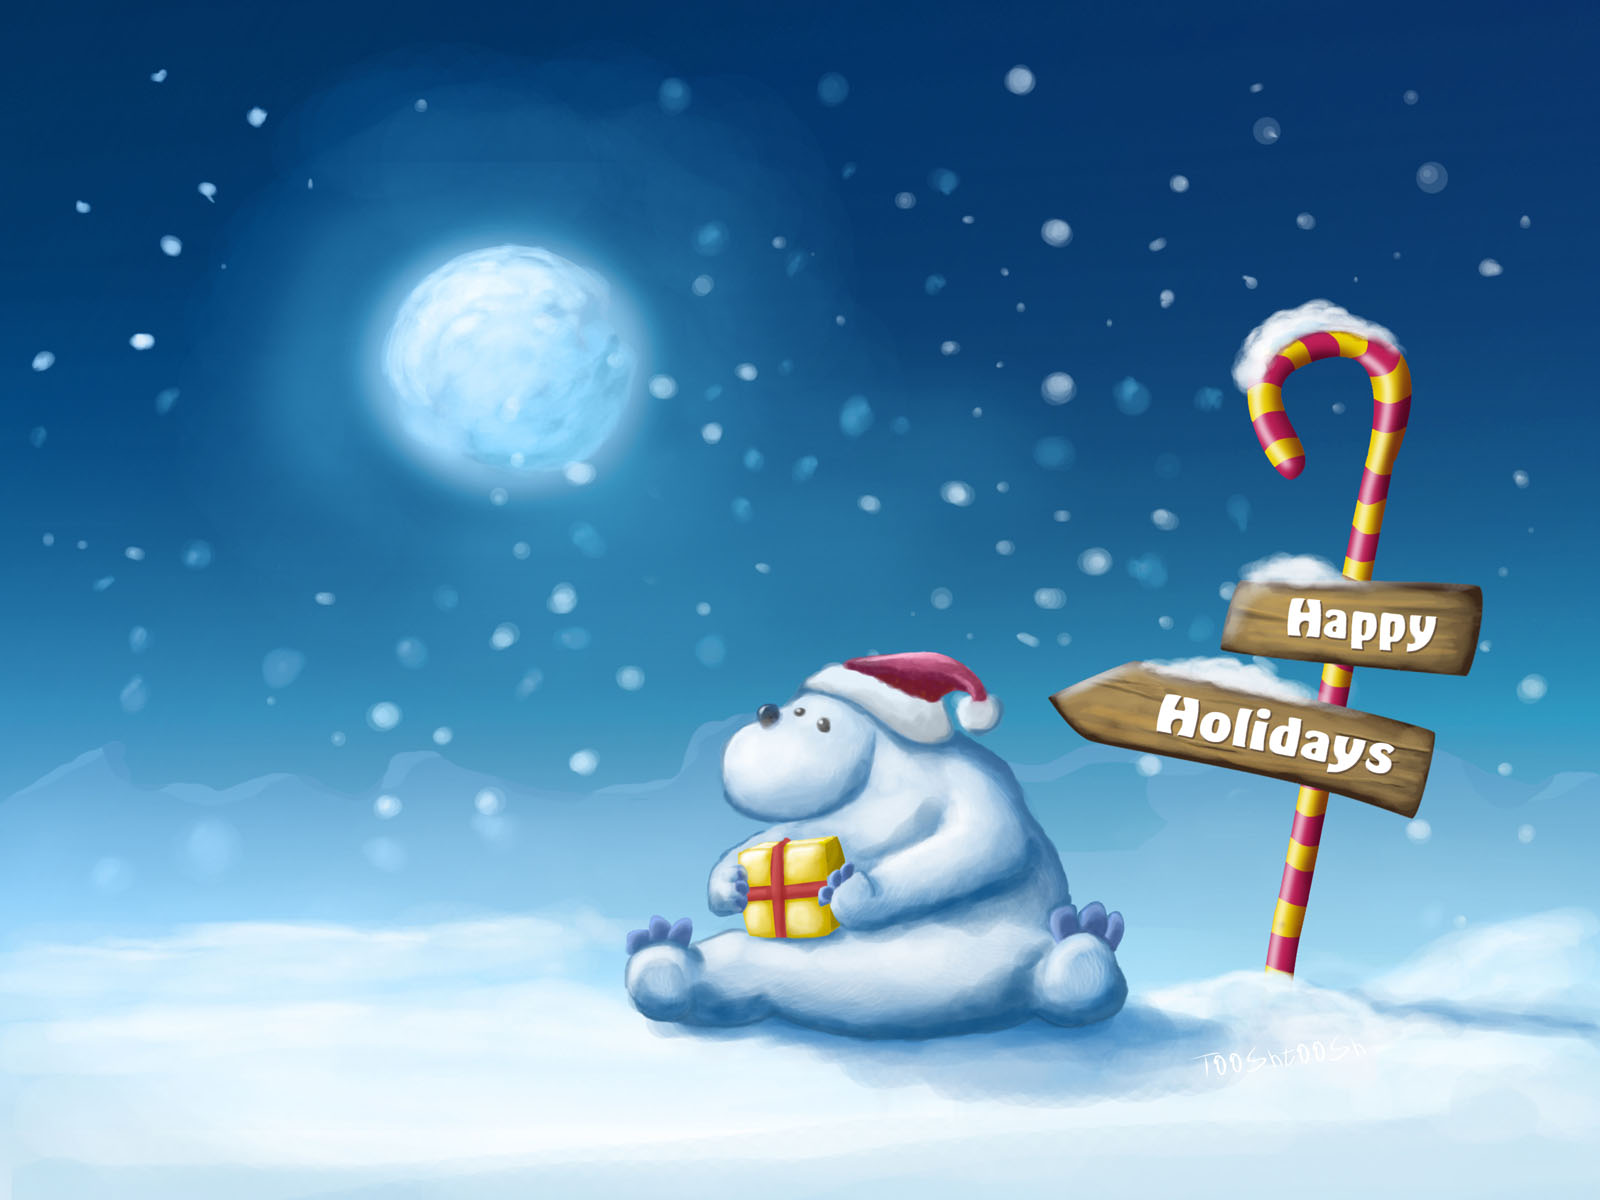 Fun Happy Holiday Wishes - HD Wallpaper 